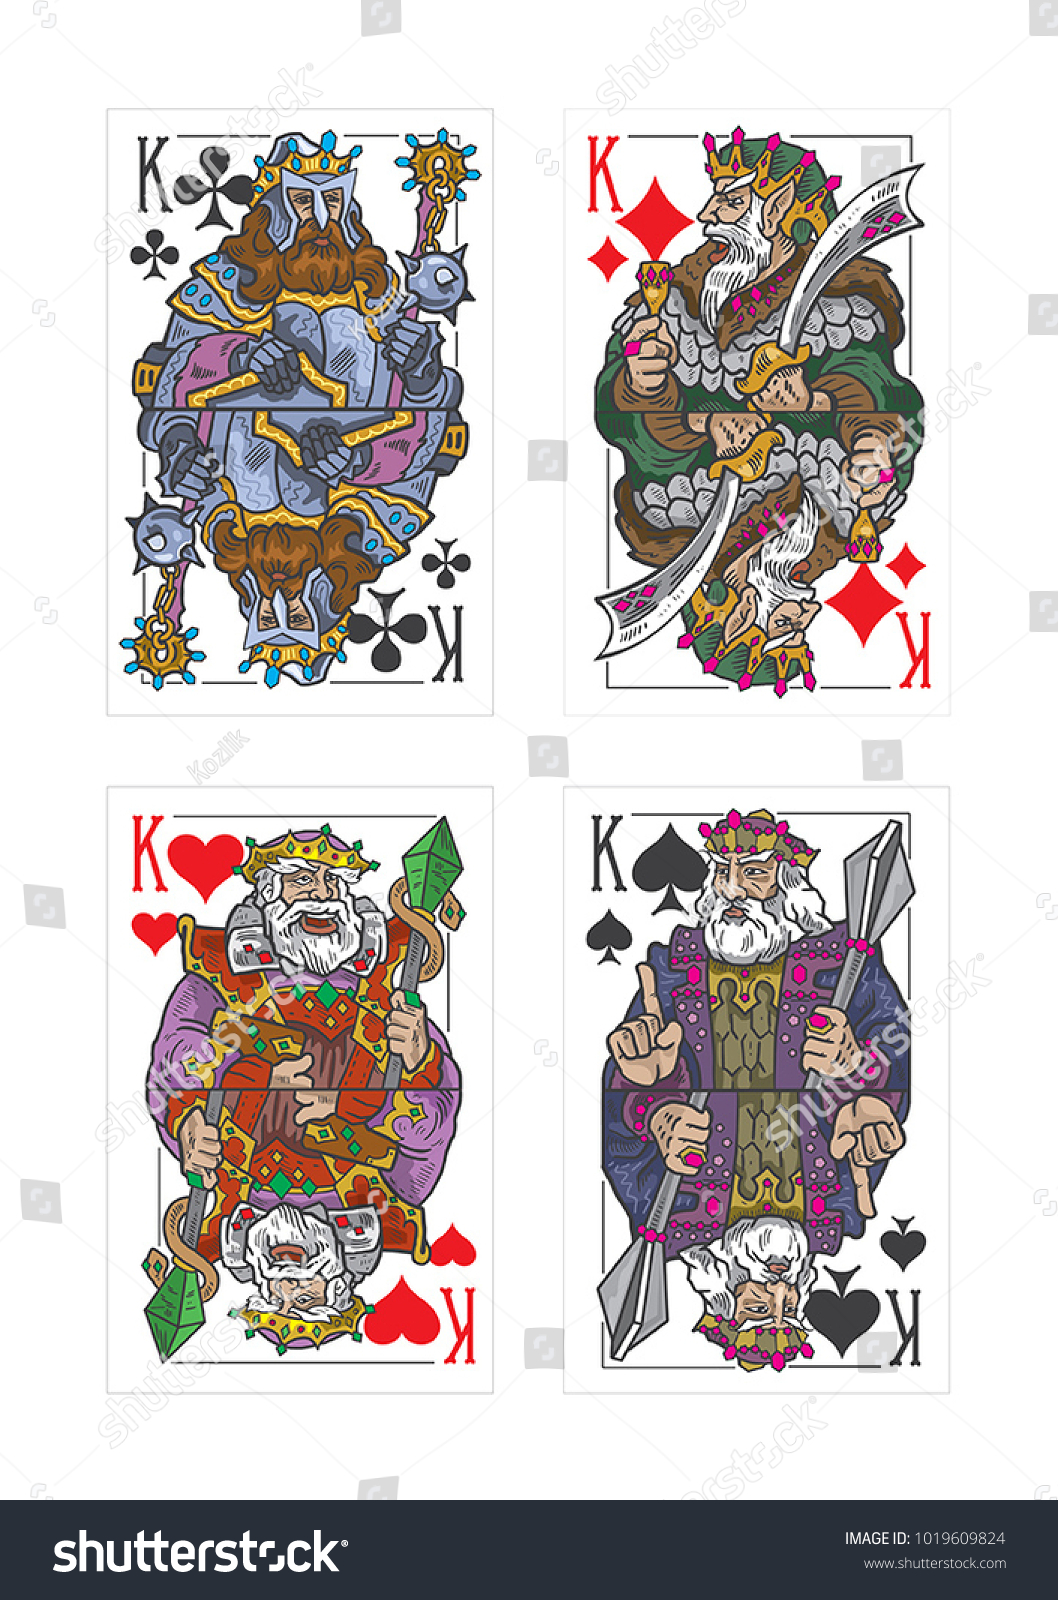 Classic Playing Card Playing Card Hearts King of Hearts Game Room Art Heart King King Card King Rose Heart Crown Classic King